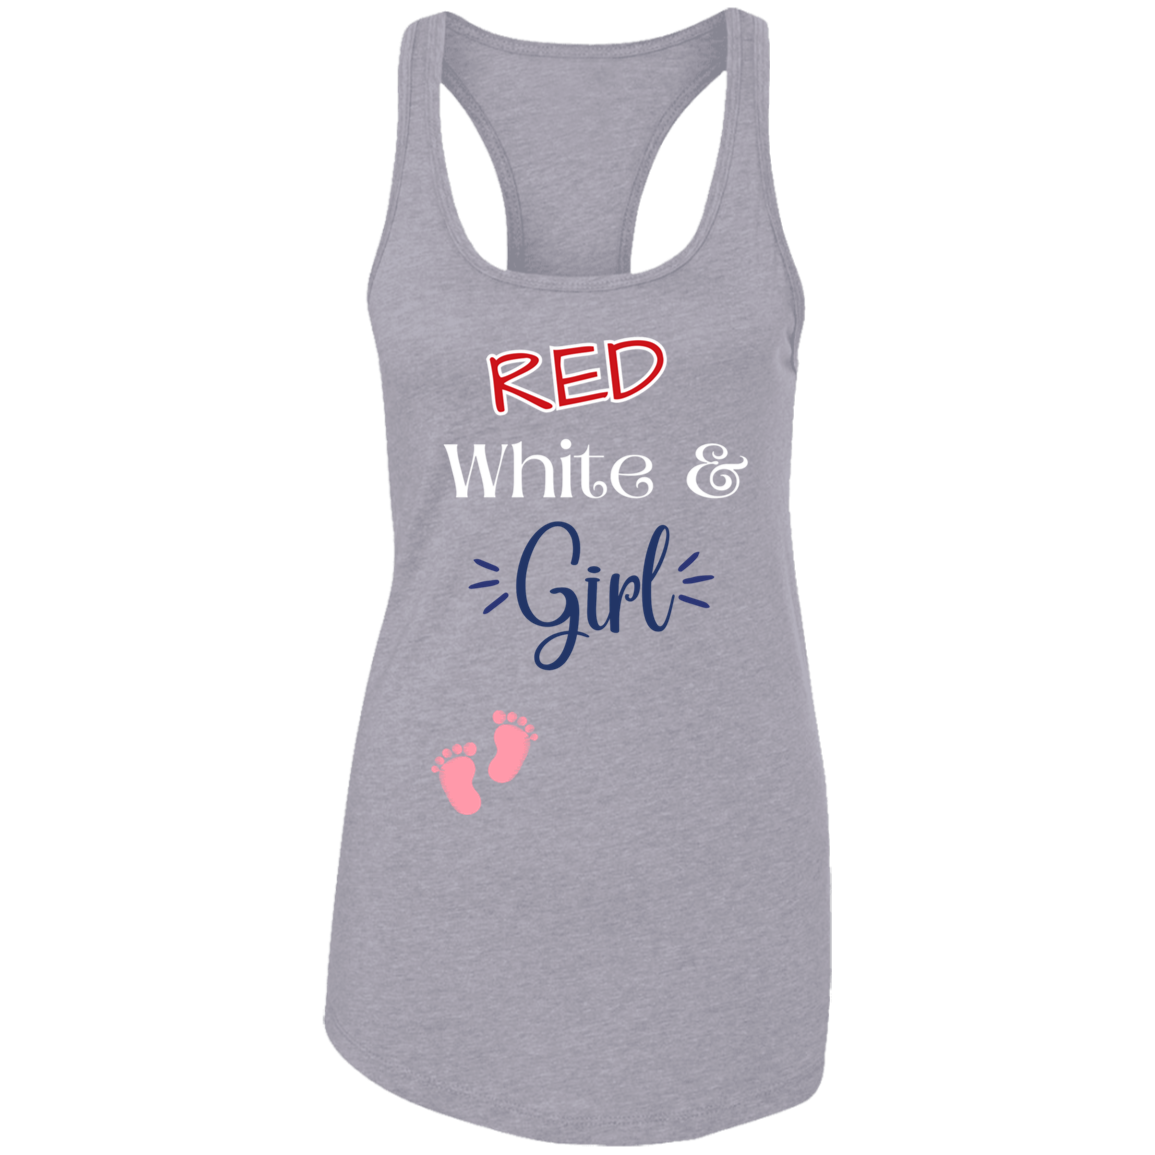 Red White and Girl pregnancy shirt,